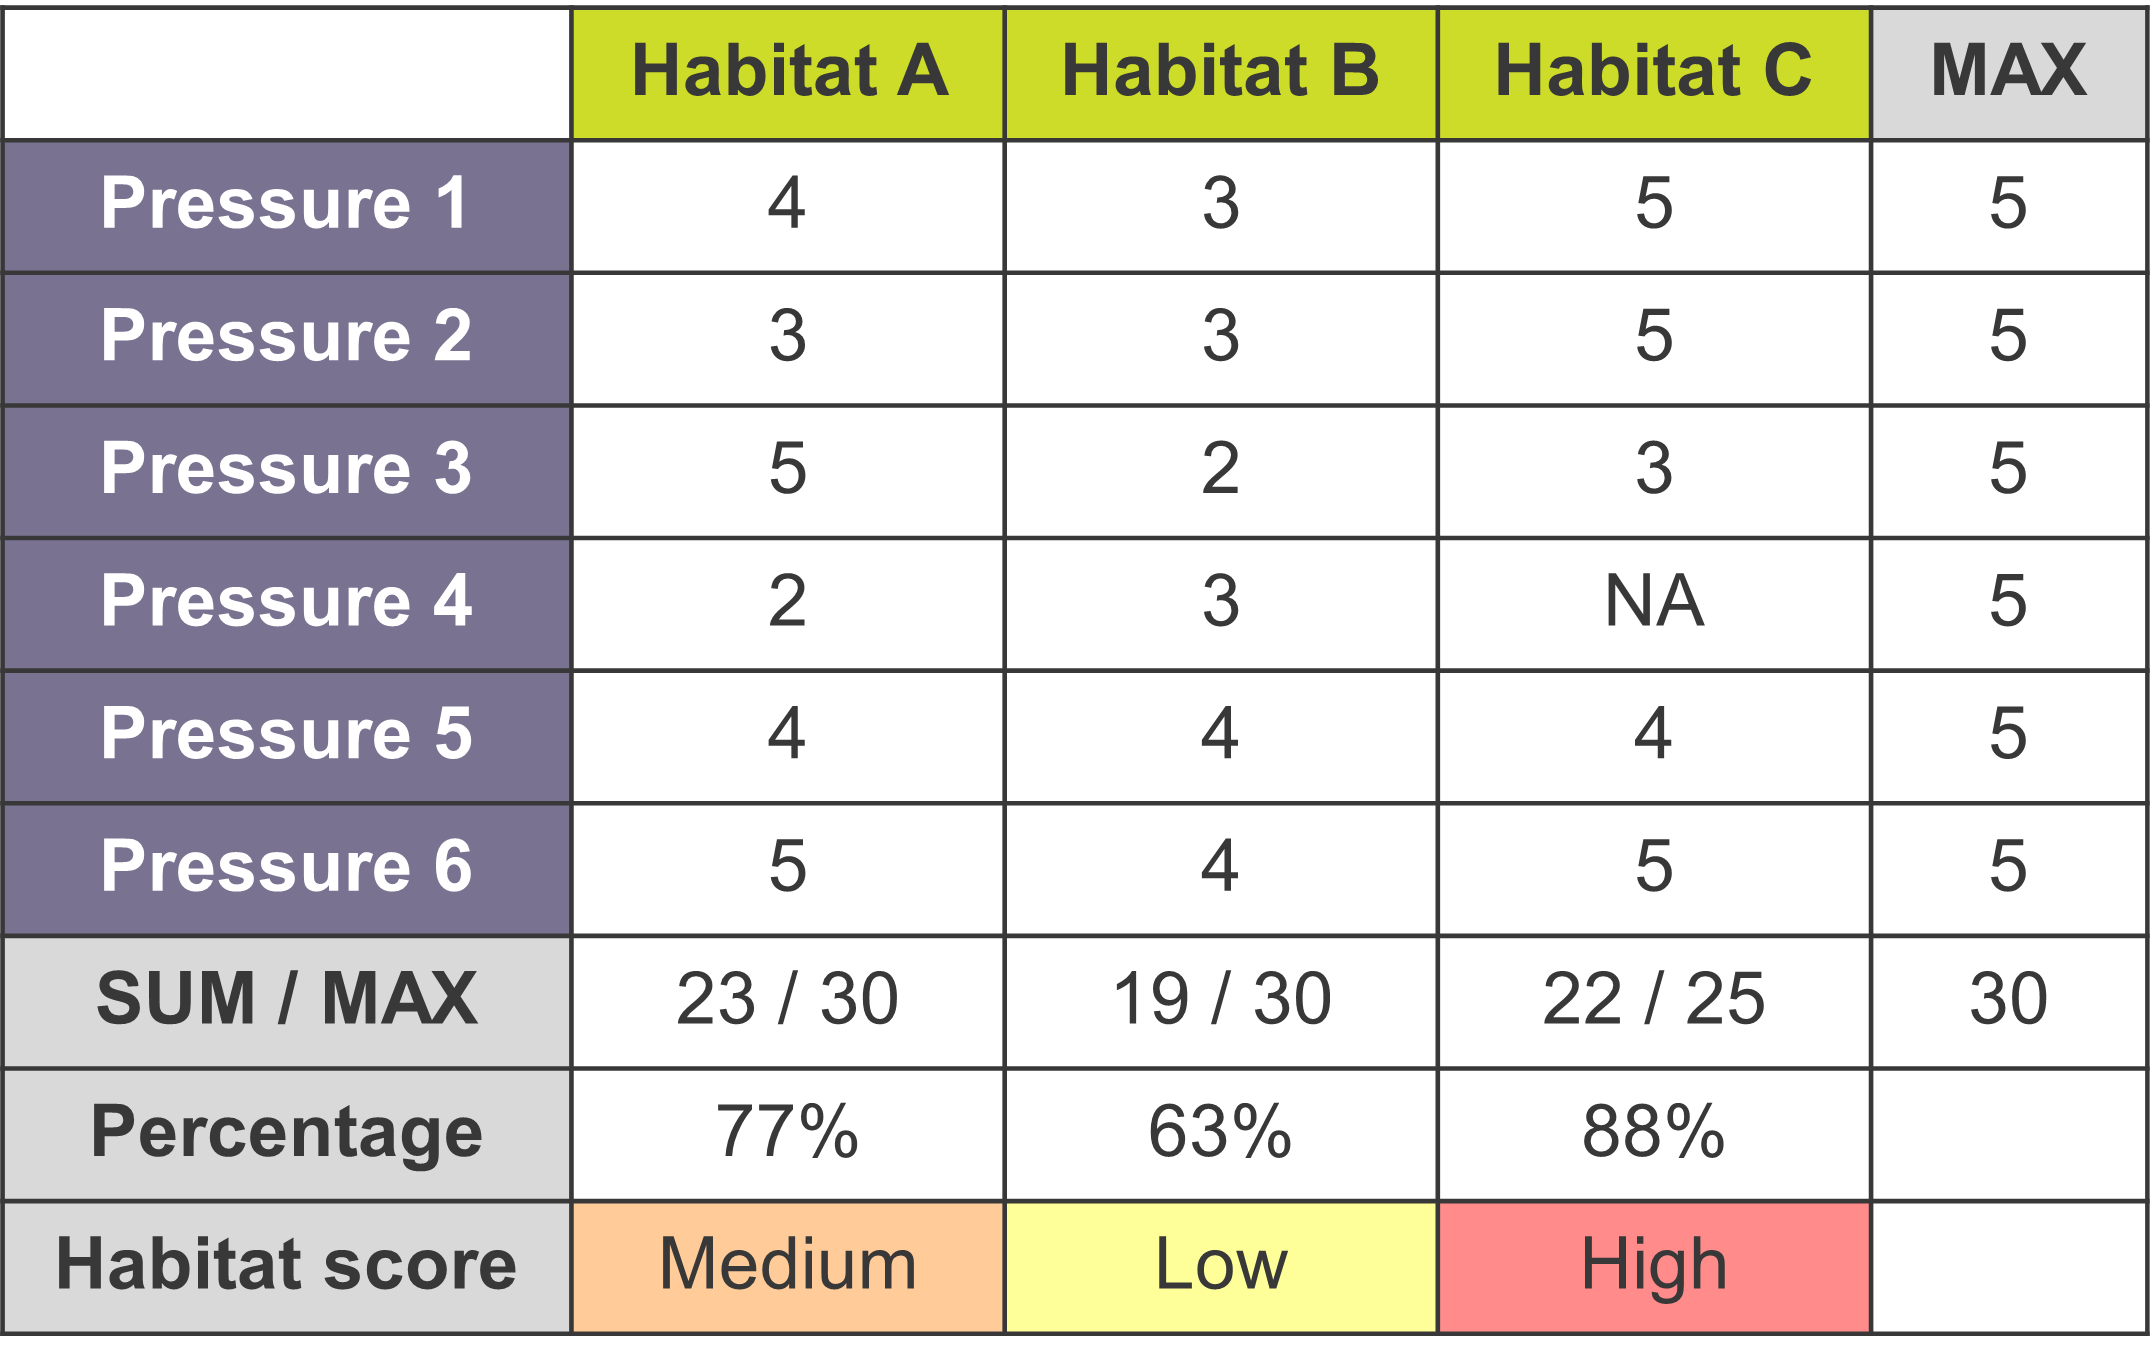 Example table showing the calculations involved in determining the habitat scores for Habitats A, B and C